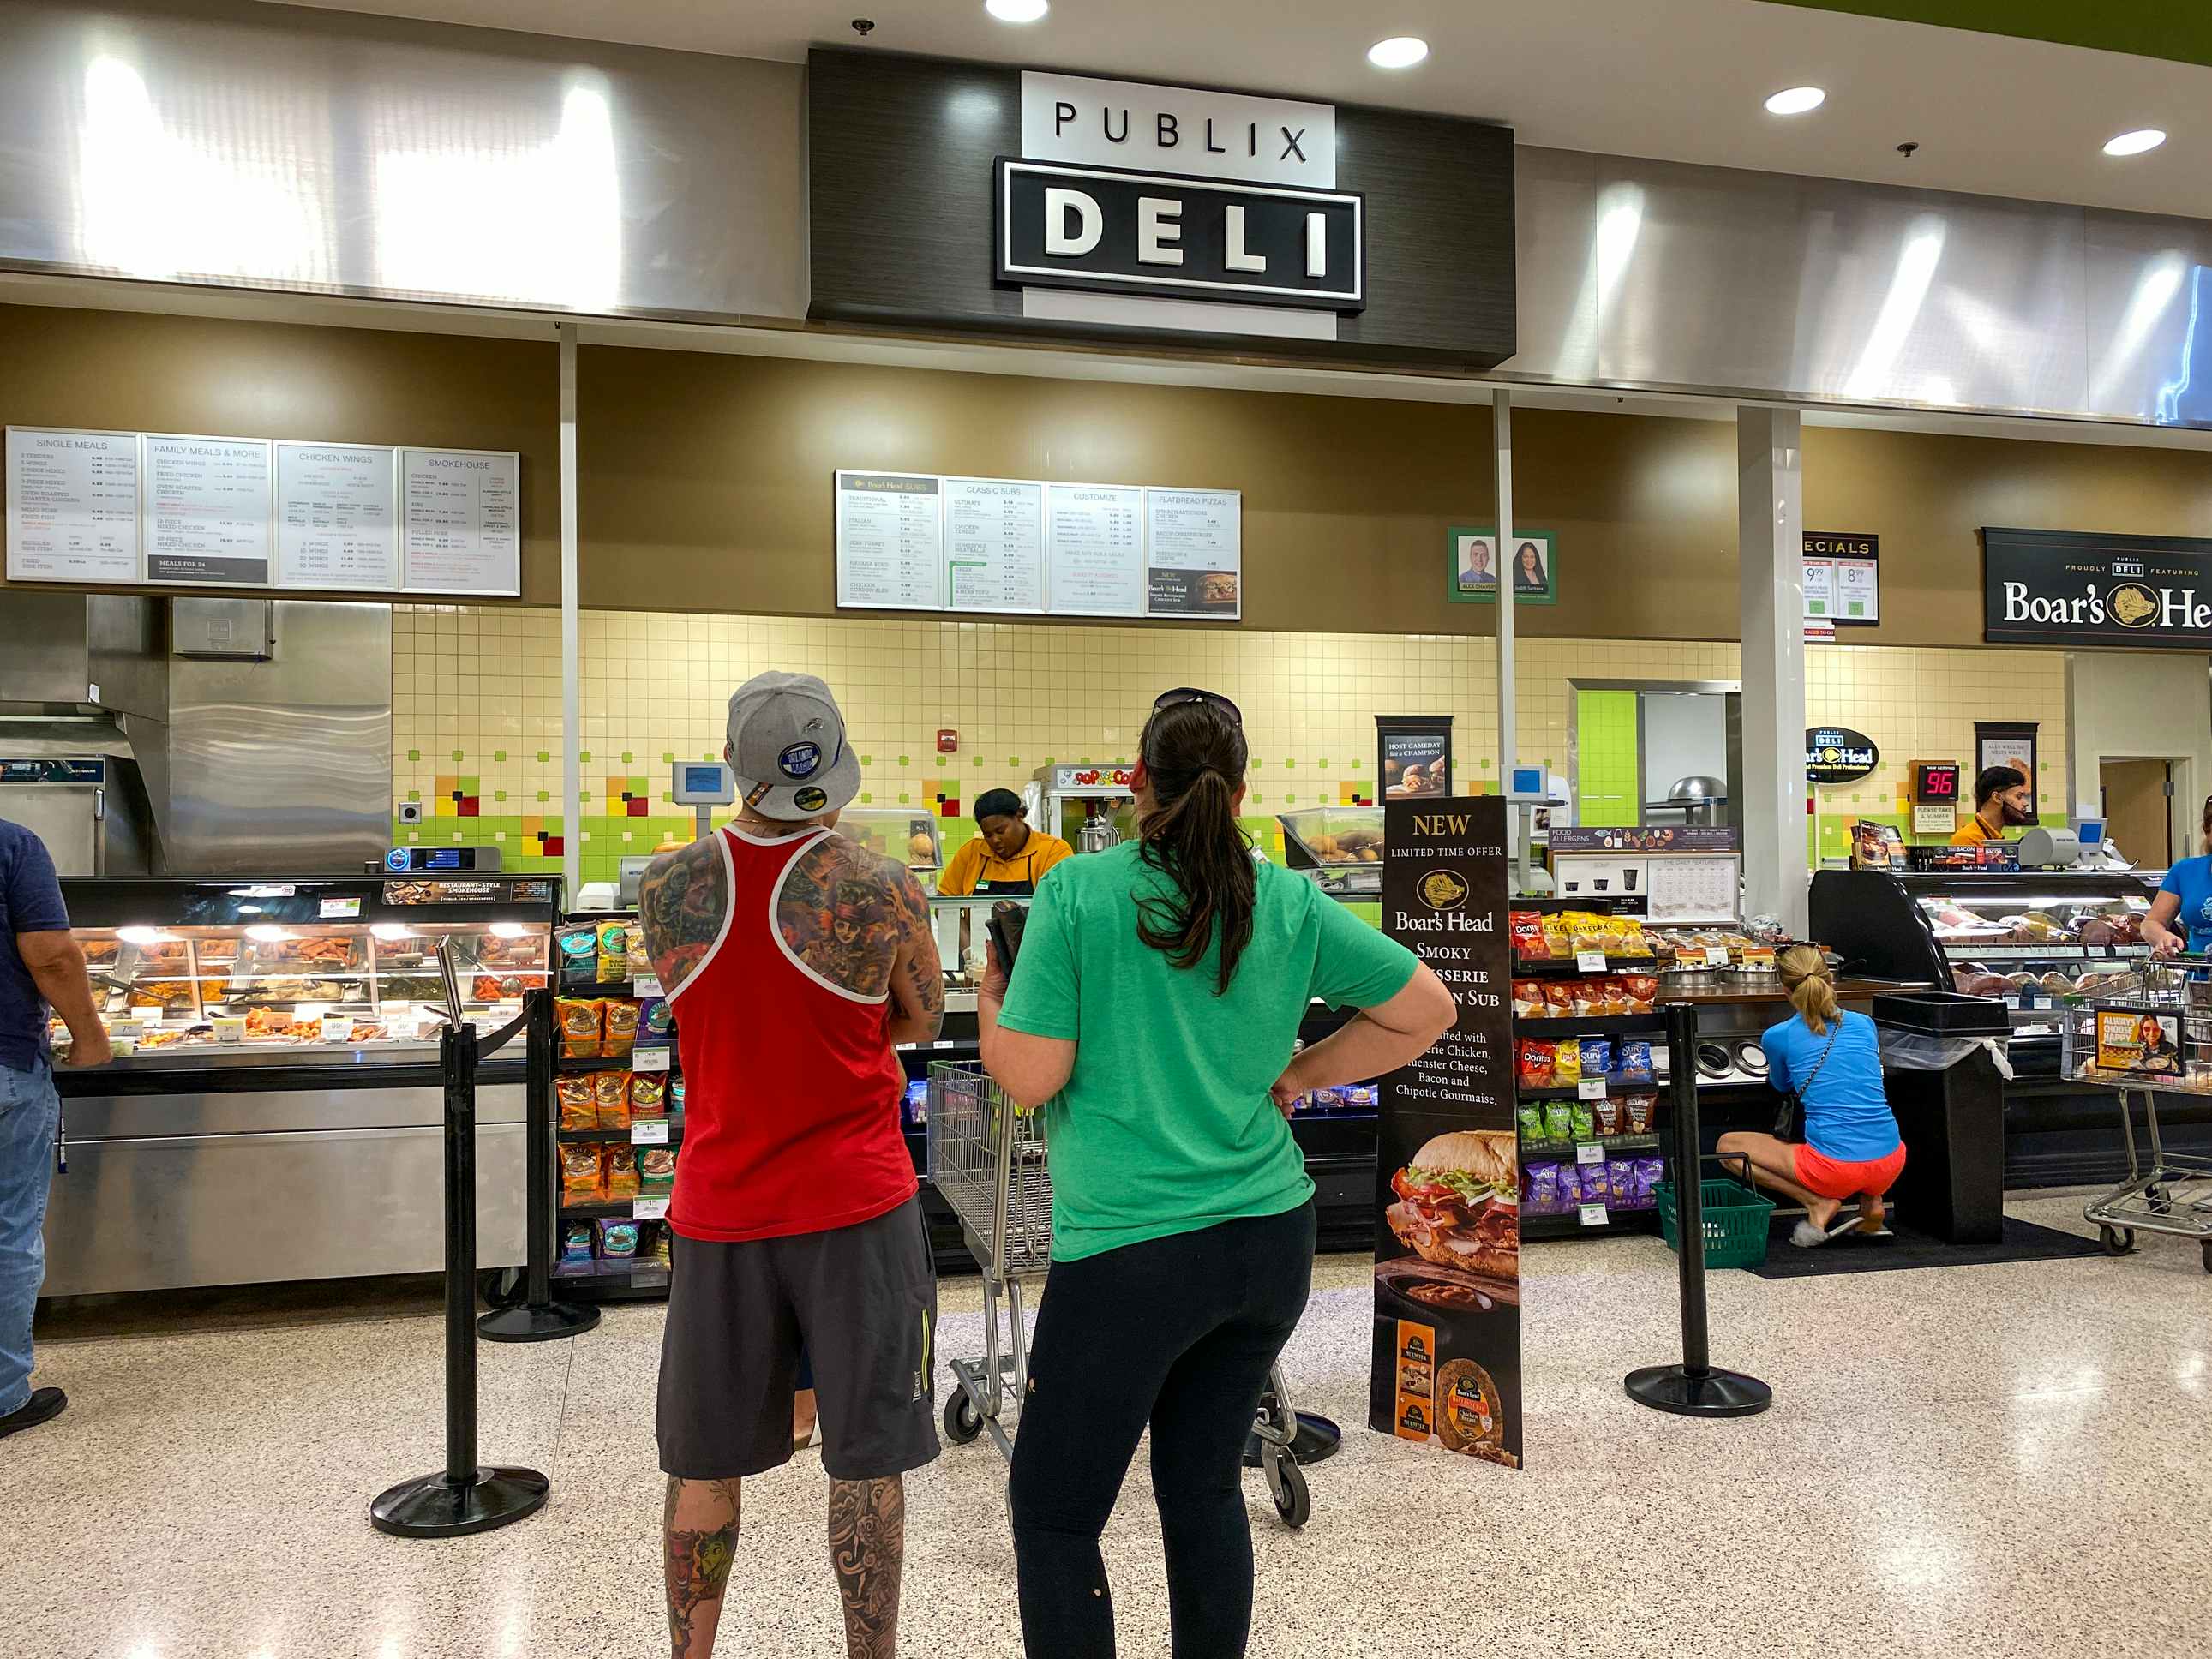 People standing in line at the Publix deli counter